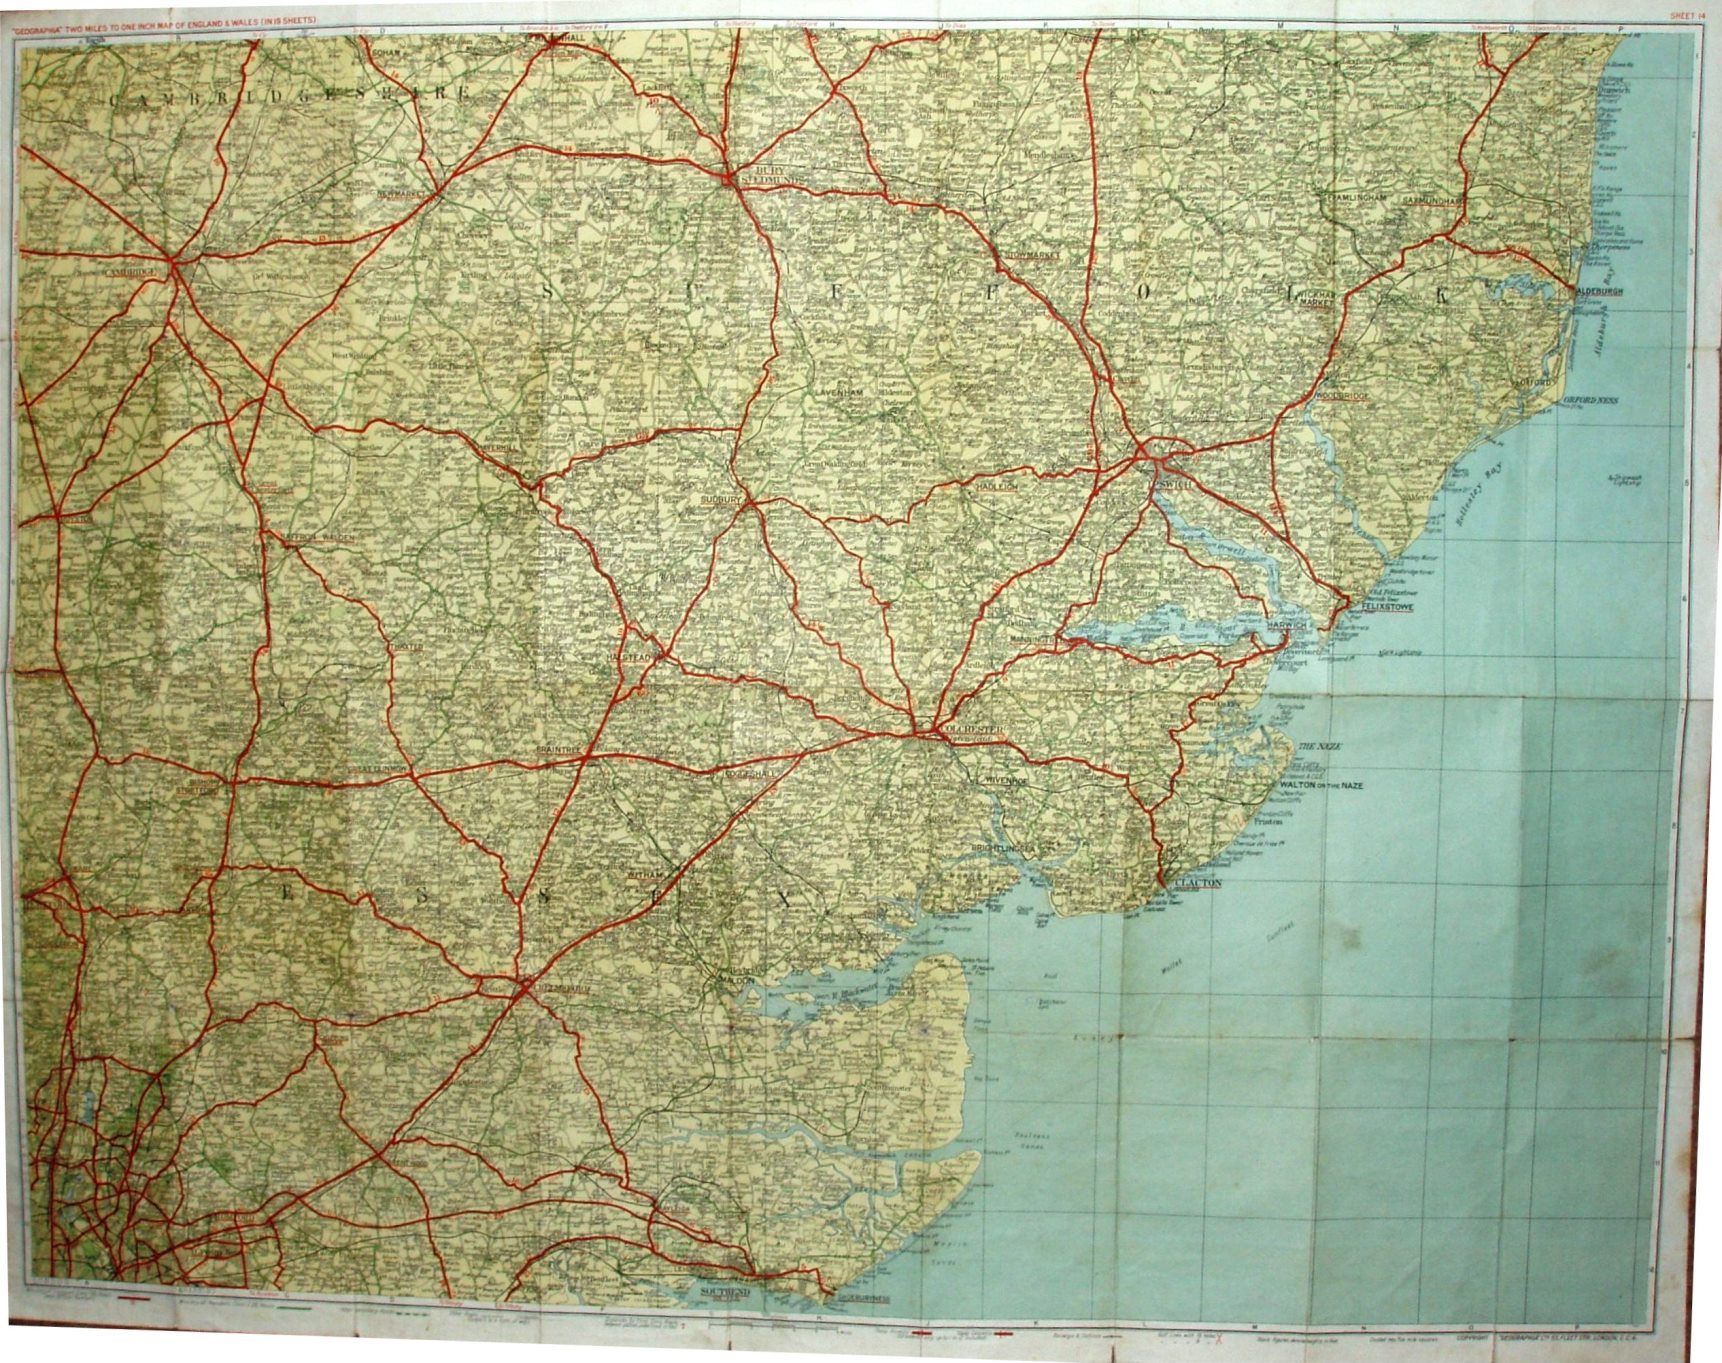 Geographia 2 Miles to the Inch Maps, Sheet 14, 1929